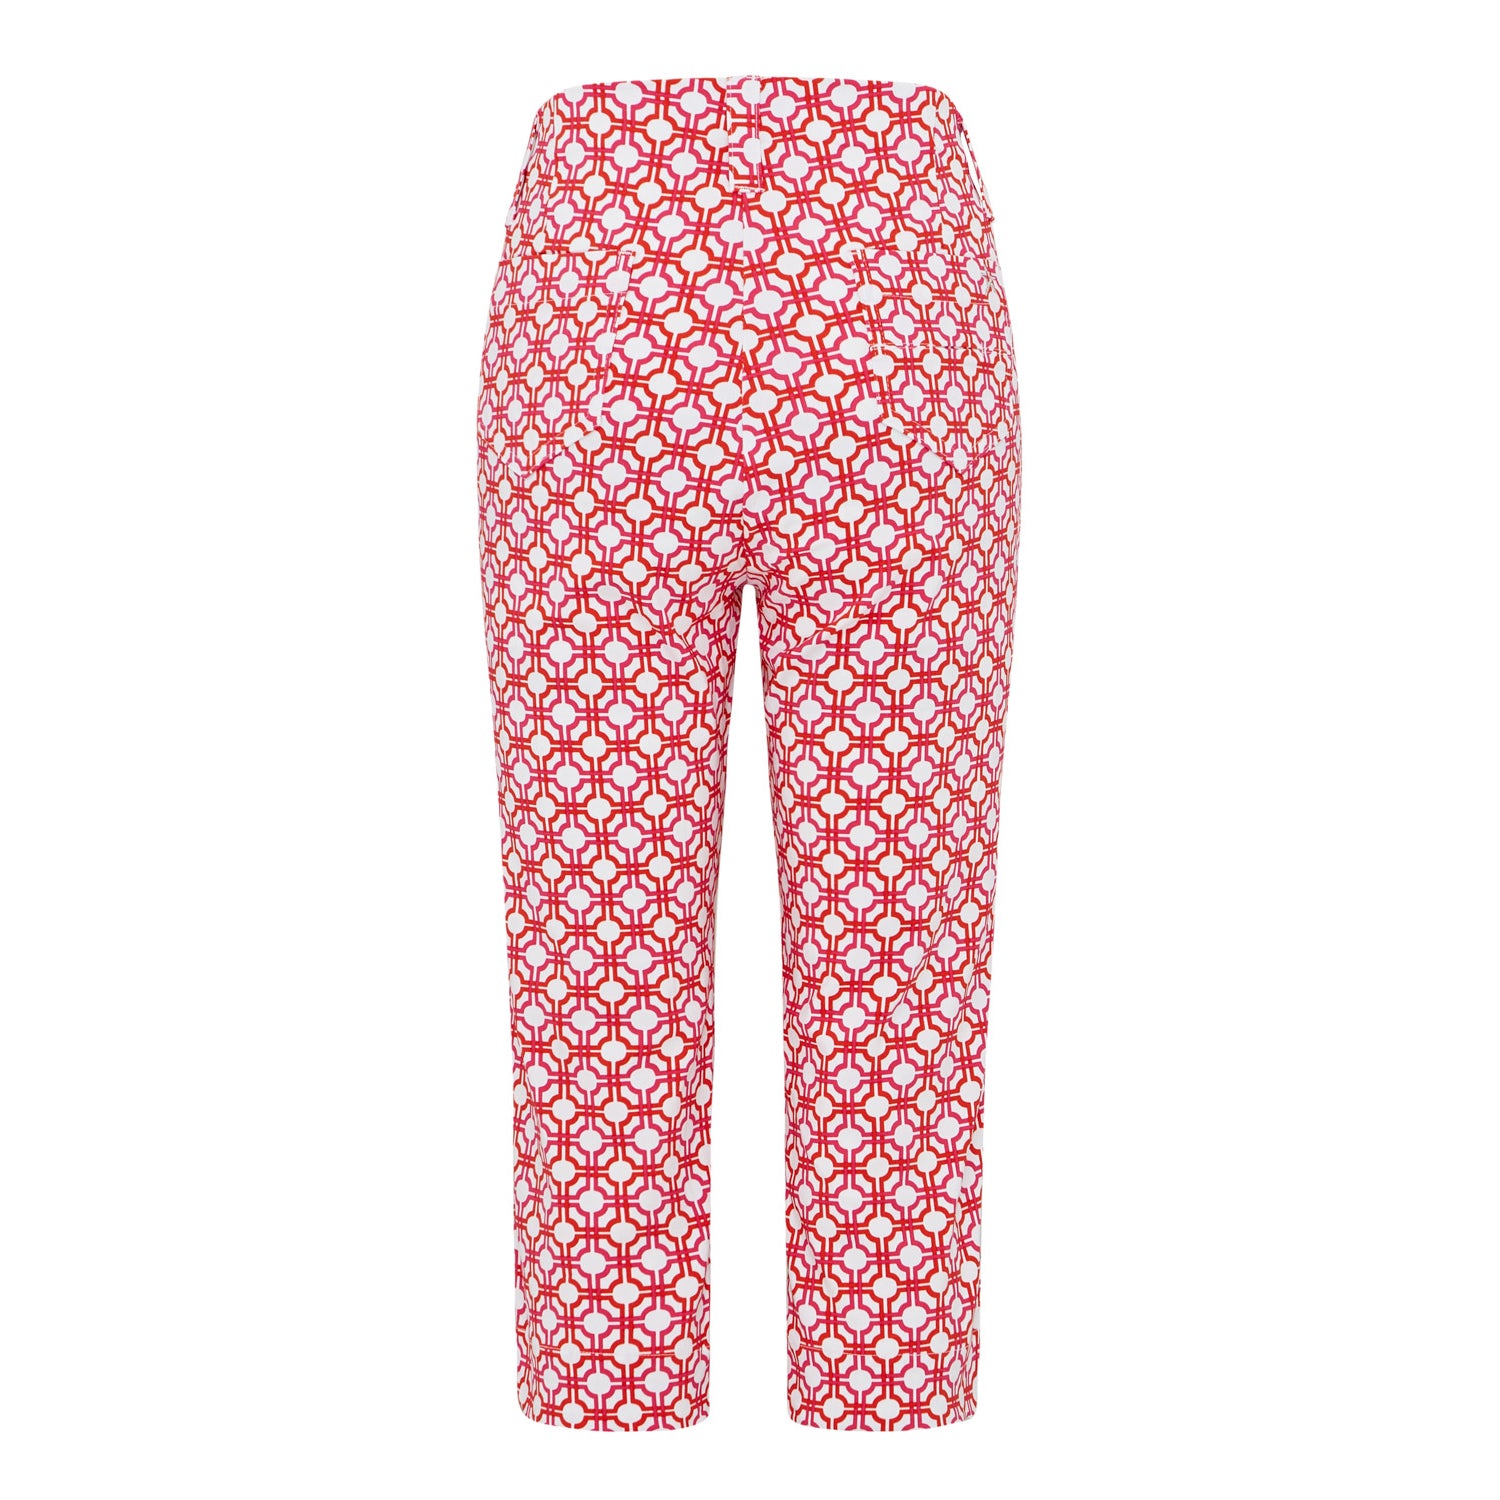 Swing Out Sister Ladies Pull-On Capris in Lush Pink and Mandarin with ...